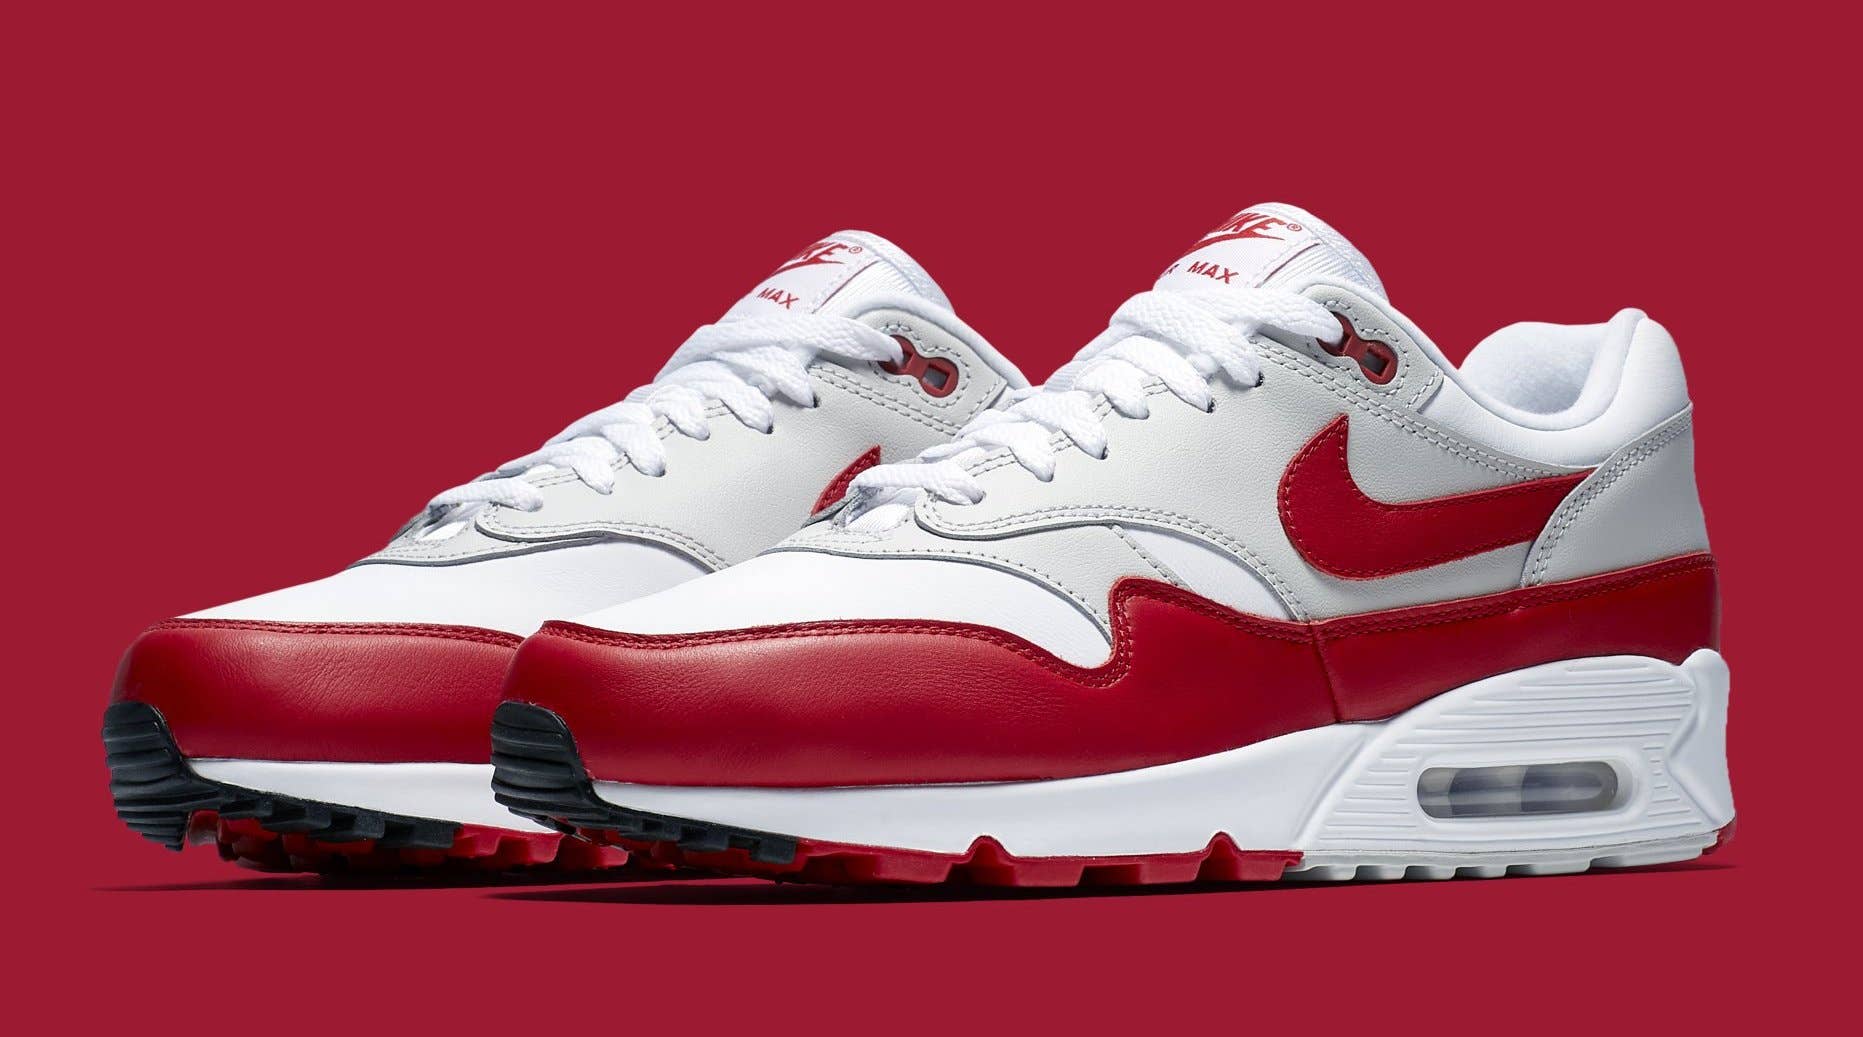 The Nike Air Max 90/1 Hybrid Will Be Available Next Weekend